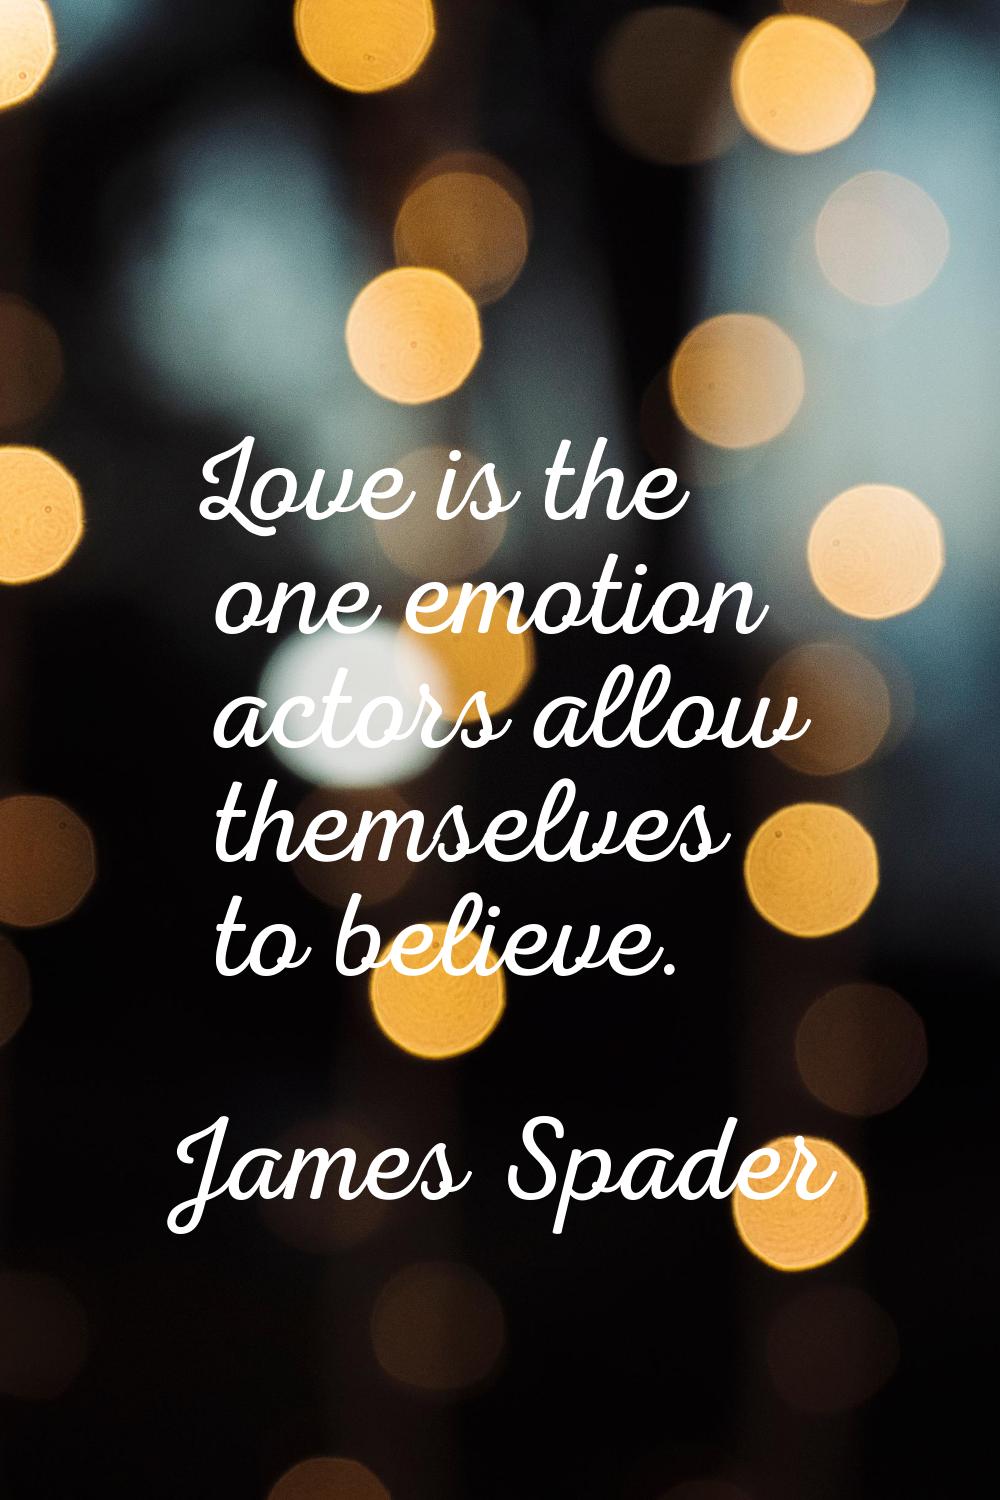 Love is the one emotion actors allow themselves to believe.